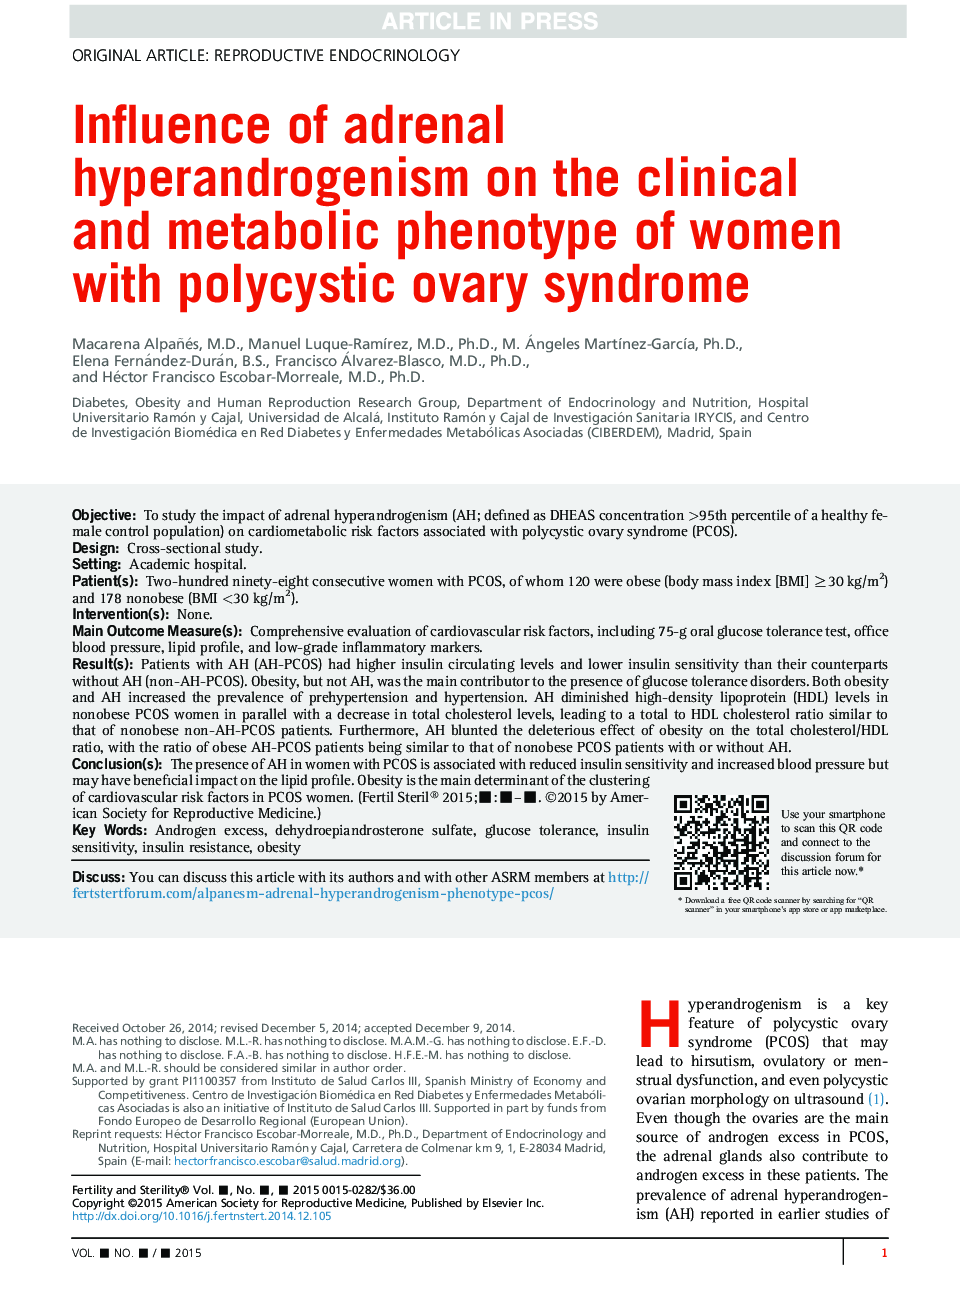 Influence of adrenal hyperandrogenism on the clinical and metabolic phenotype of women with polycystic ovary syndrome